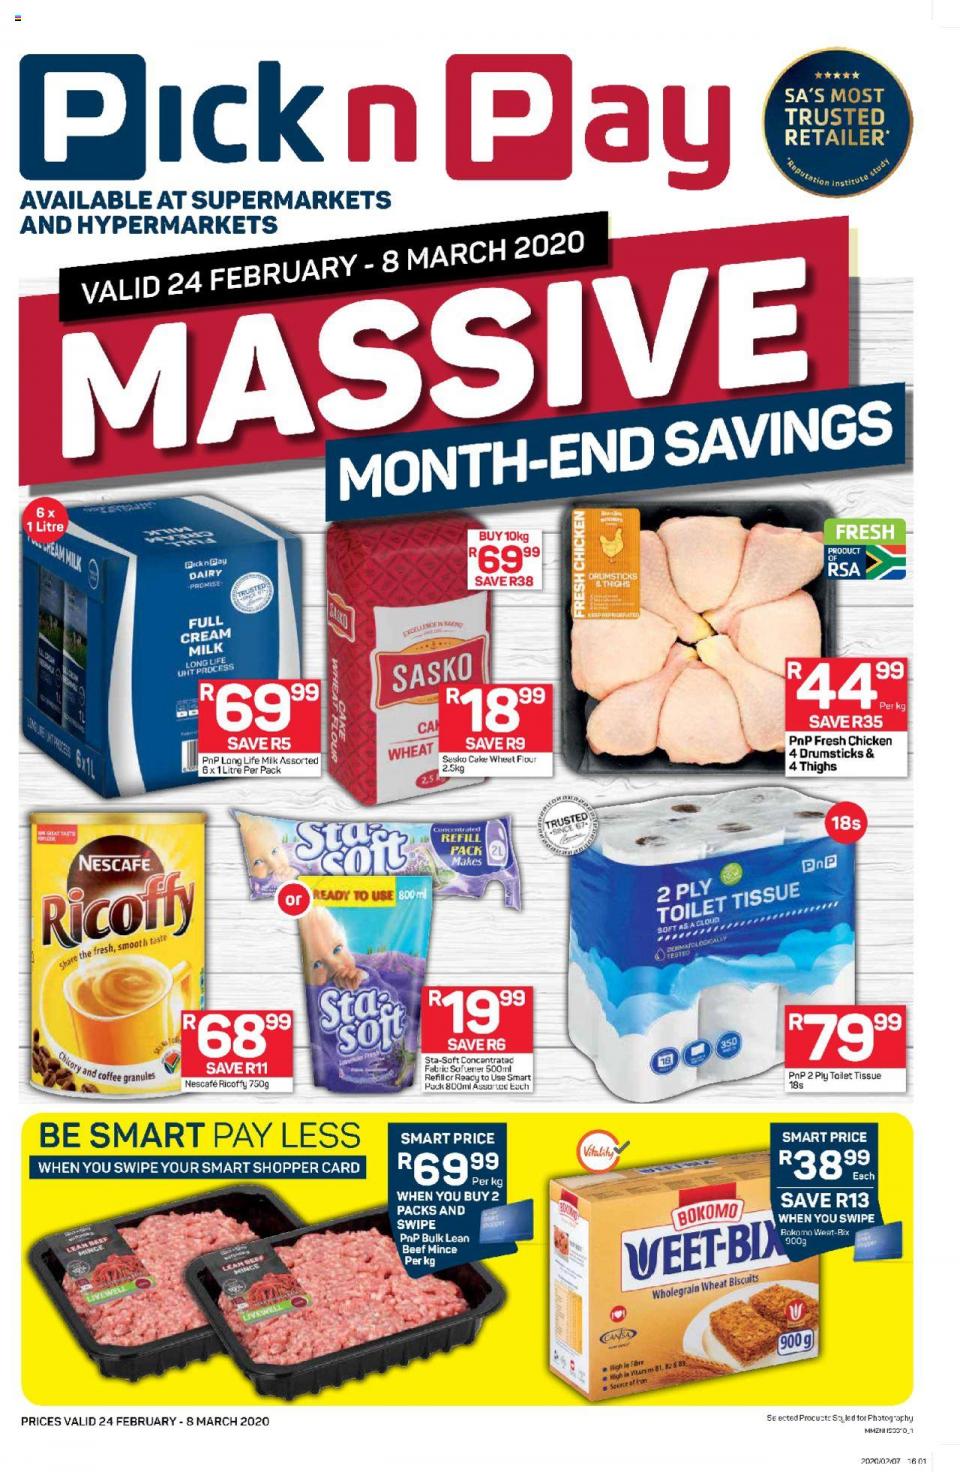 pick n pay specials massive month end savings 24 february 2020